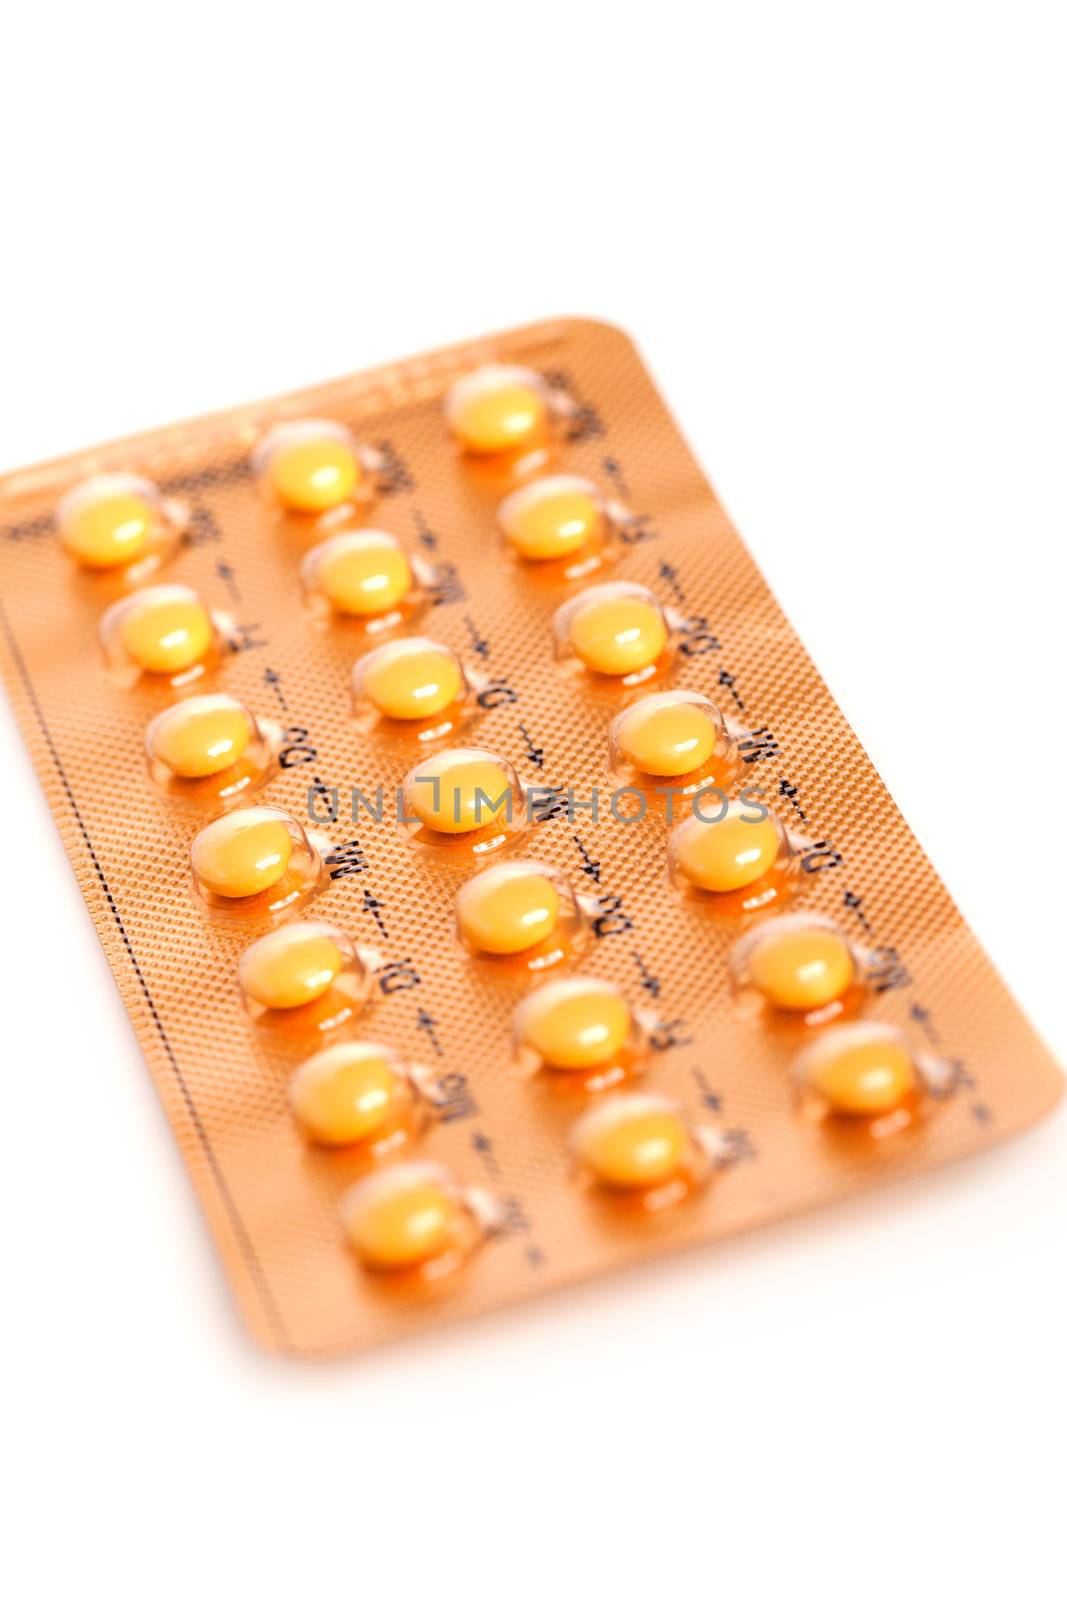 tablets (Birth Control Pills) on a white background  by motorolka